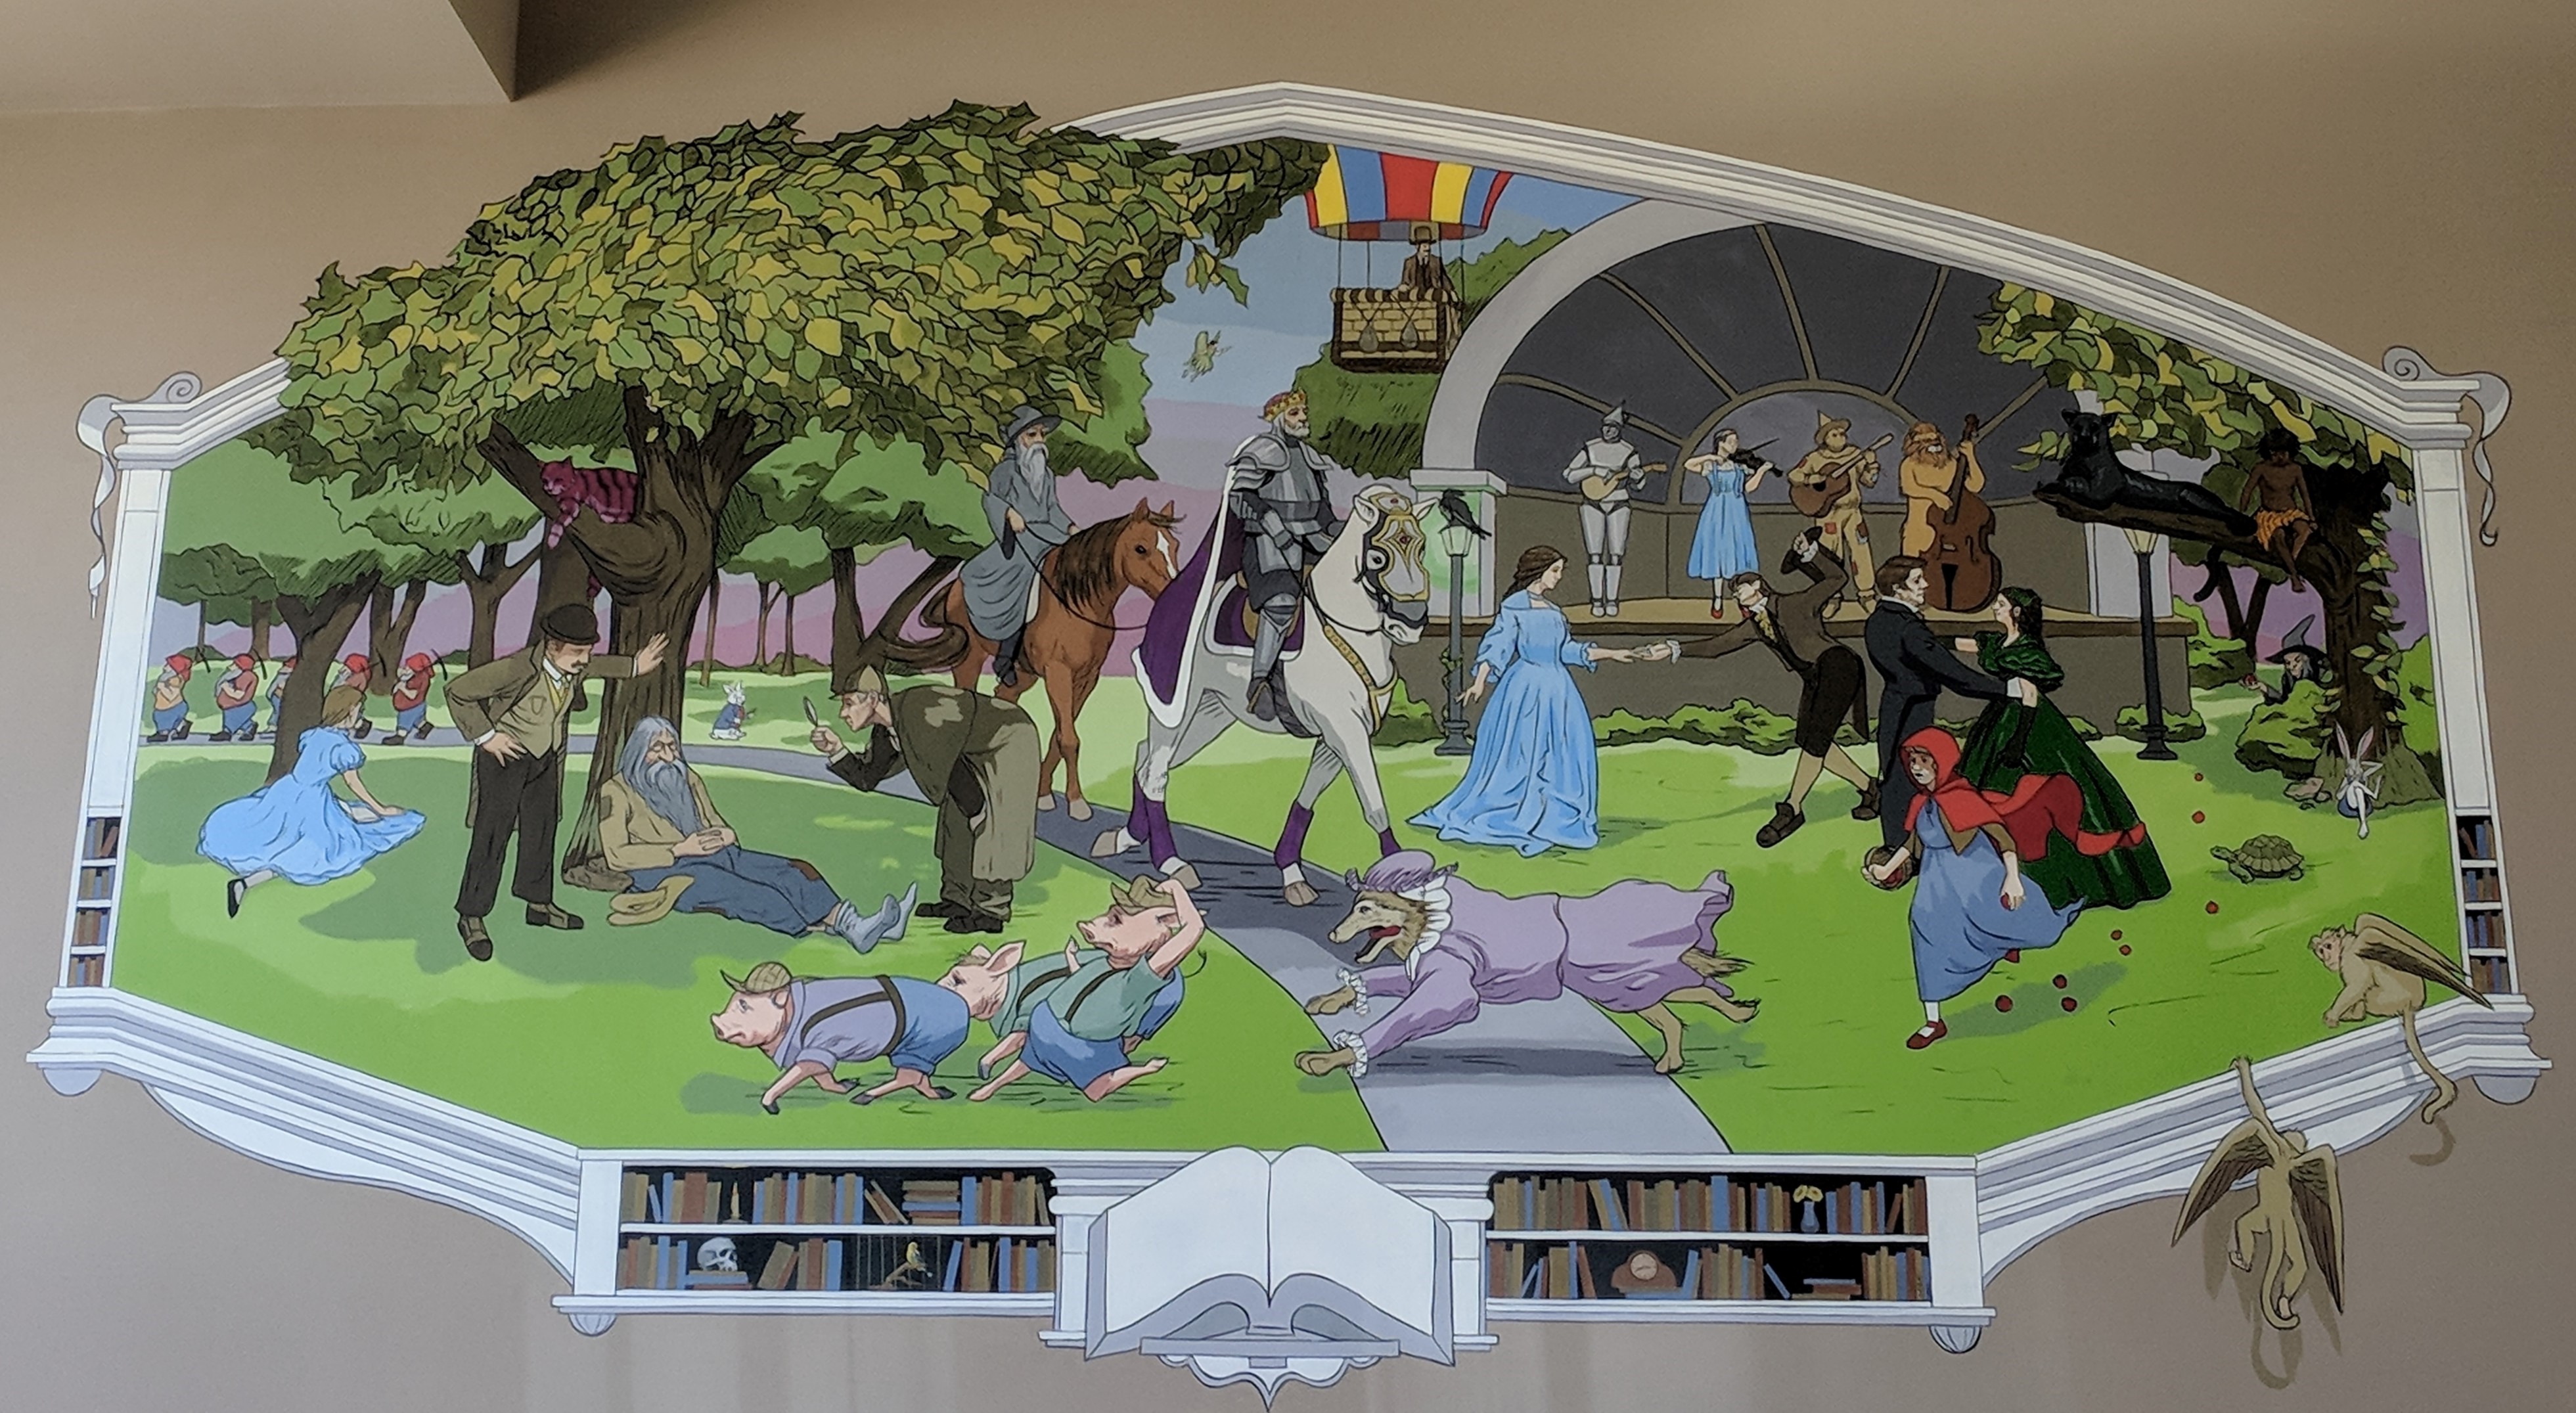 Mural depicting scenes from famous books